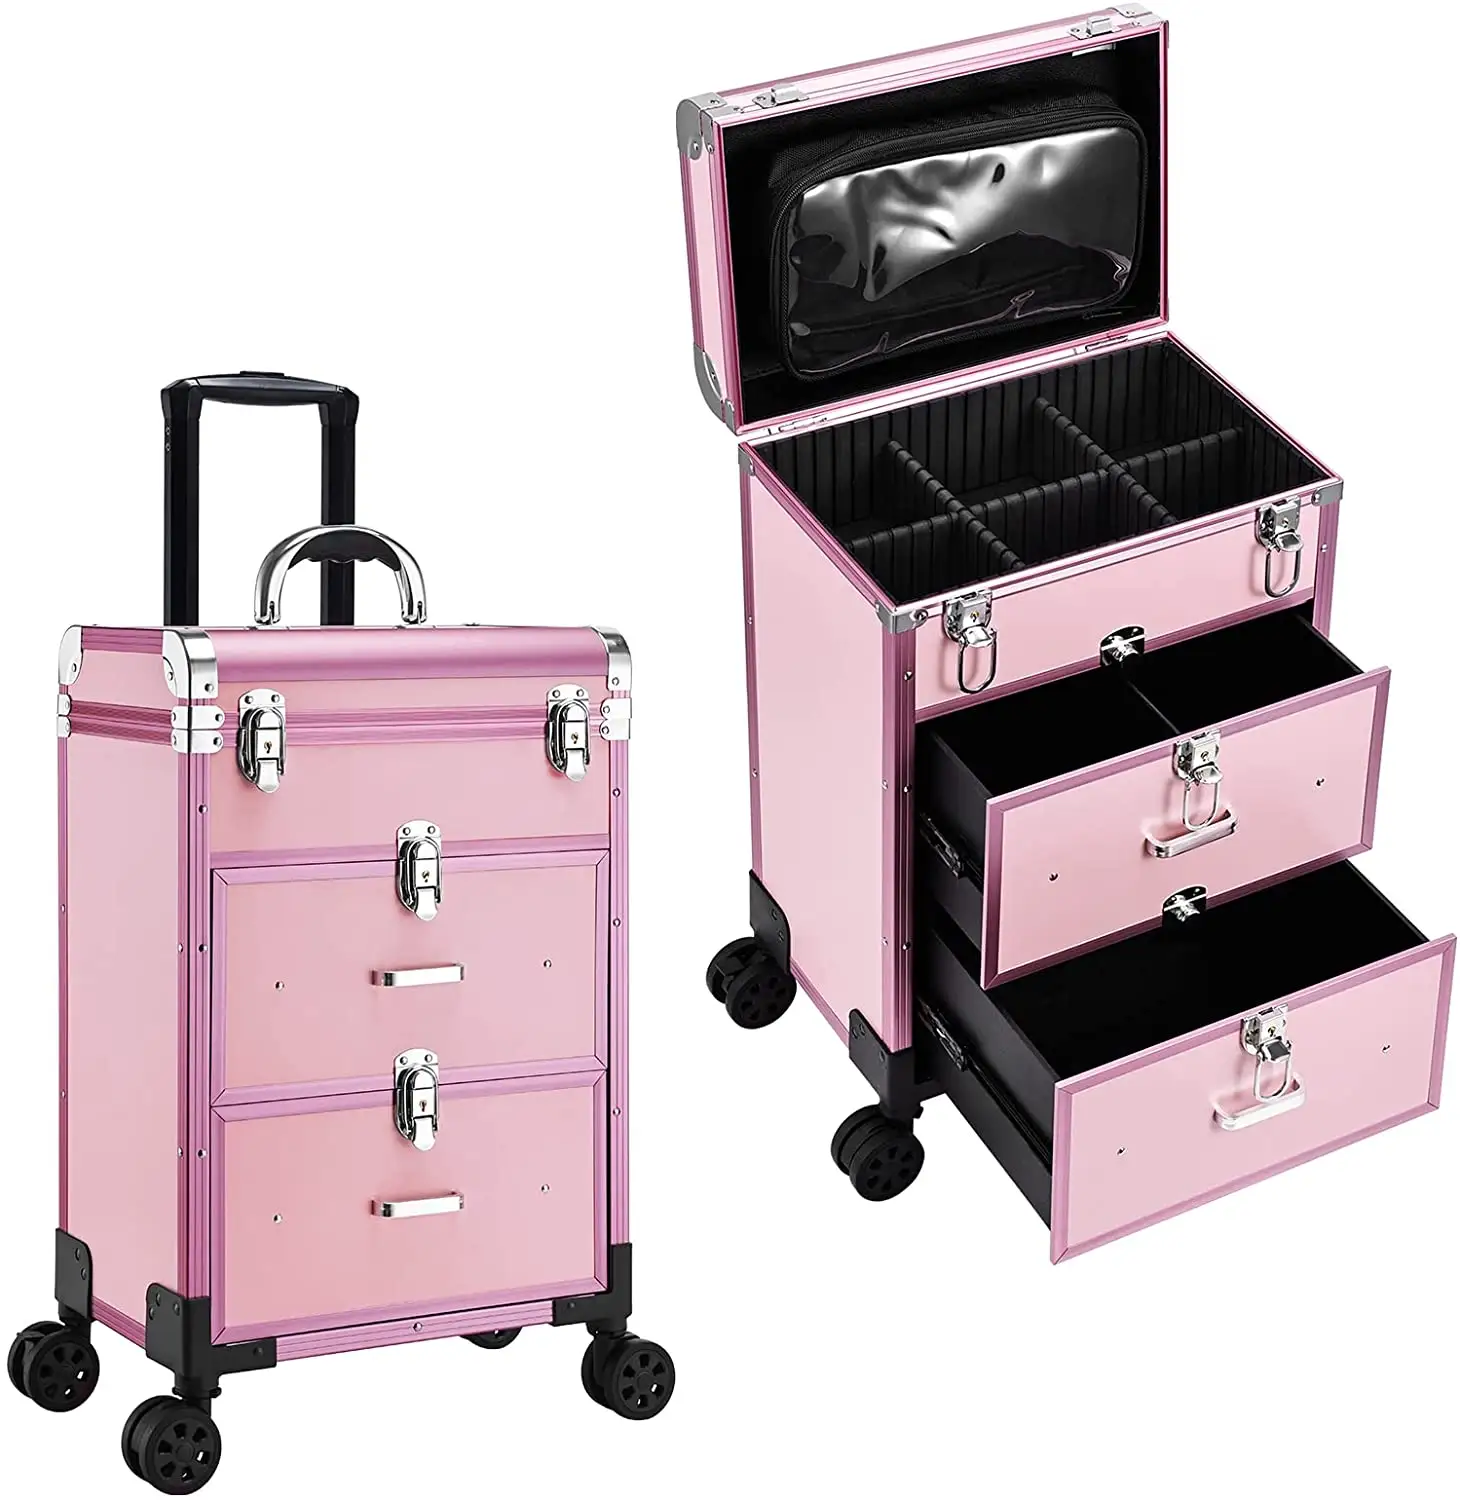 Professional Rolling Makeup Train Case with Drawers, Large Cosmetic Trolley with Locks, Cosmetics Storage Organizer Make up Case